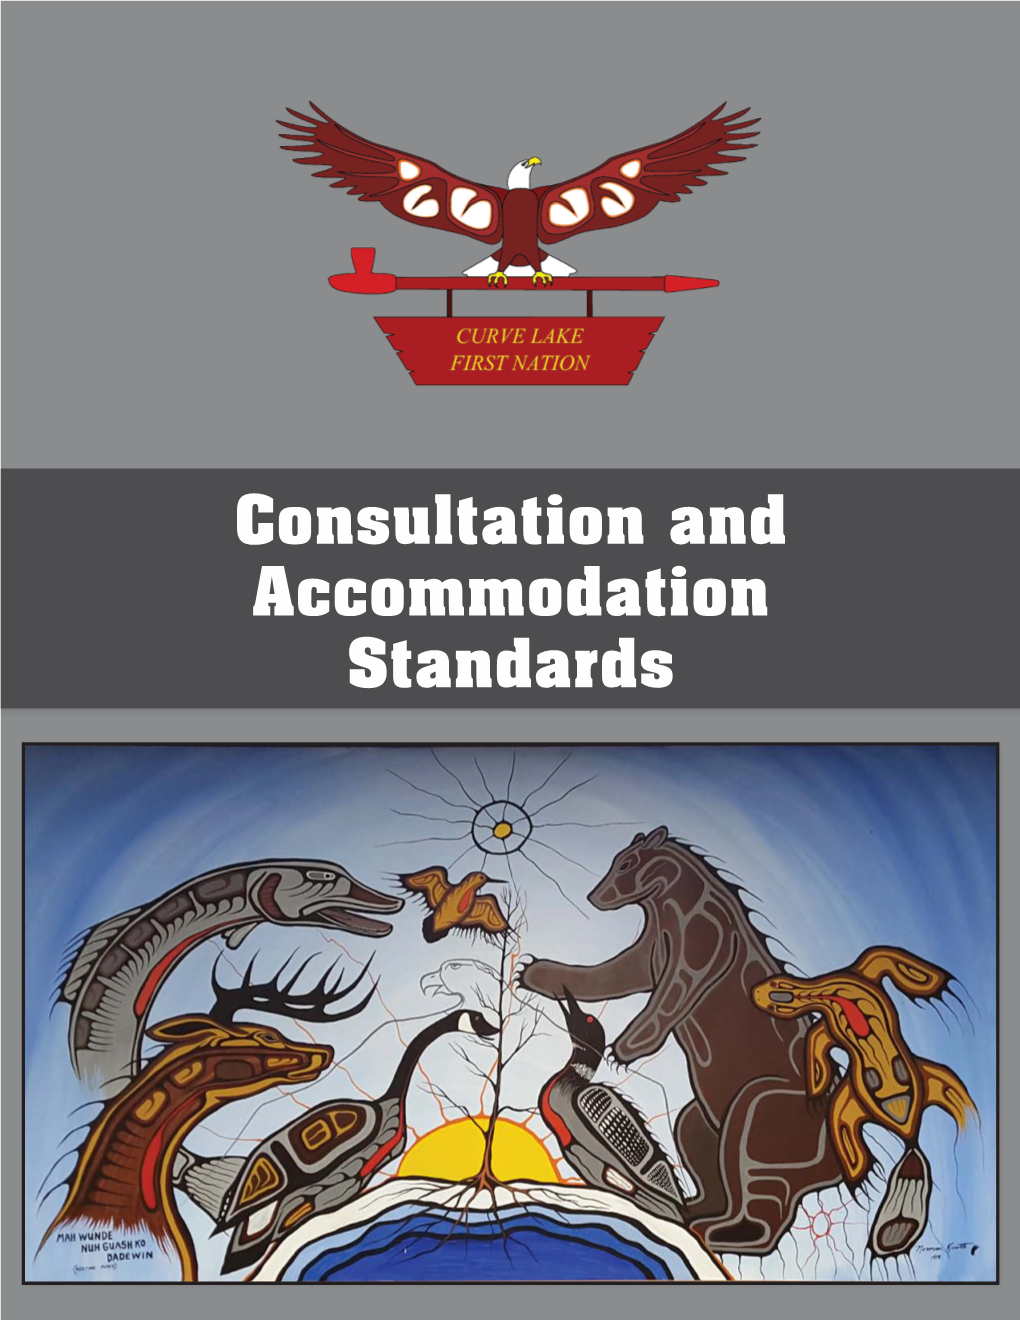 Consultation and Accommodation Standards